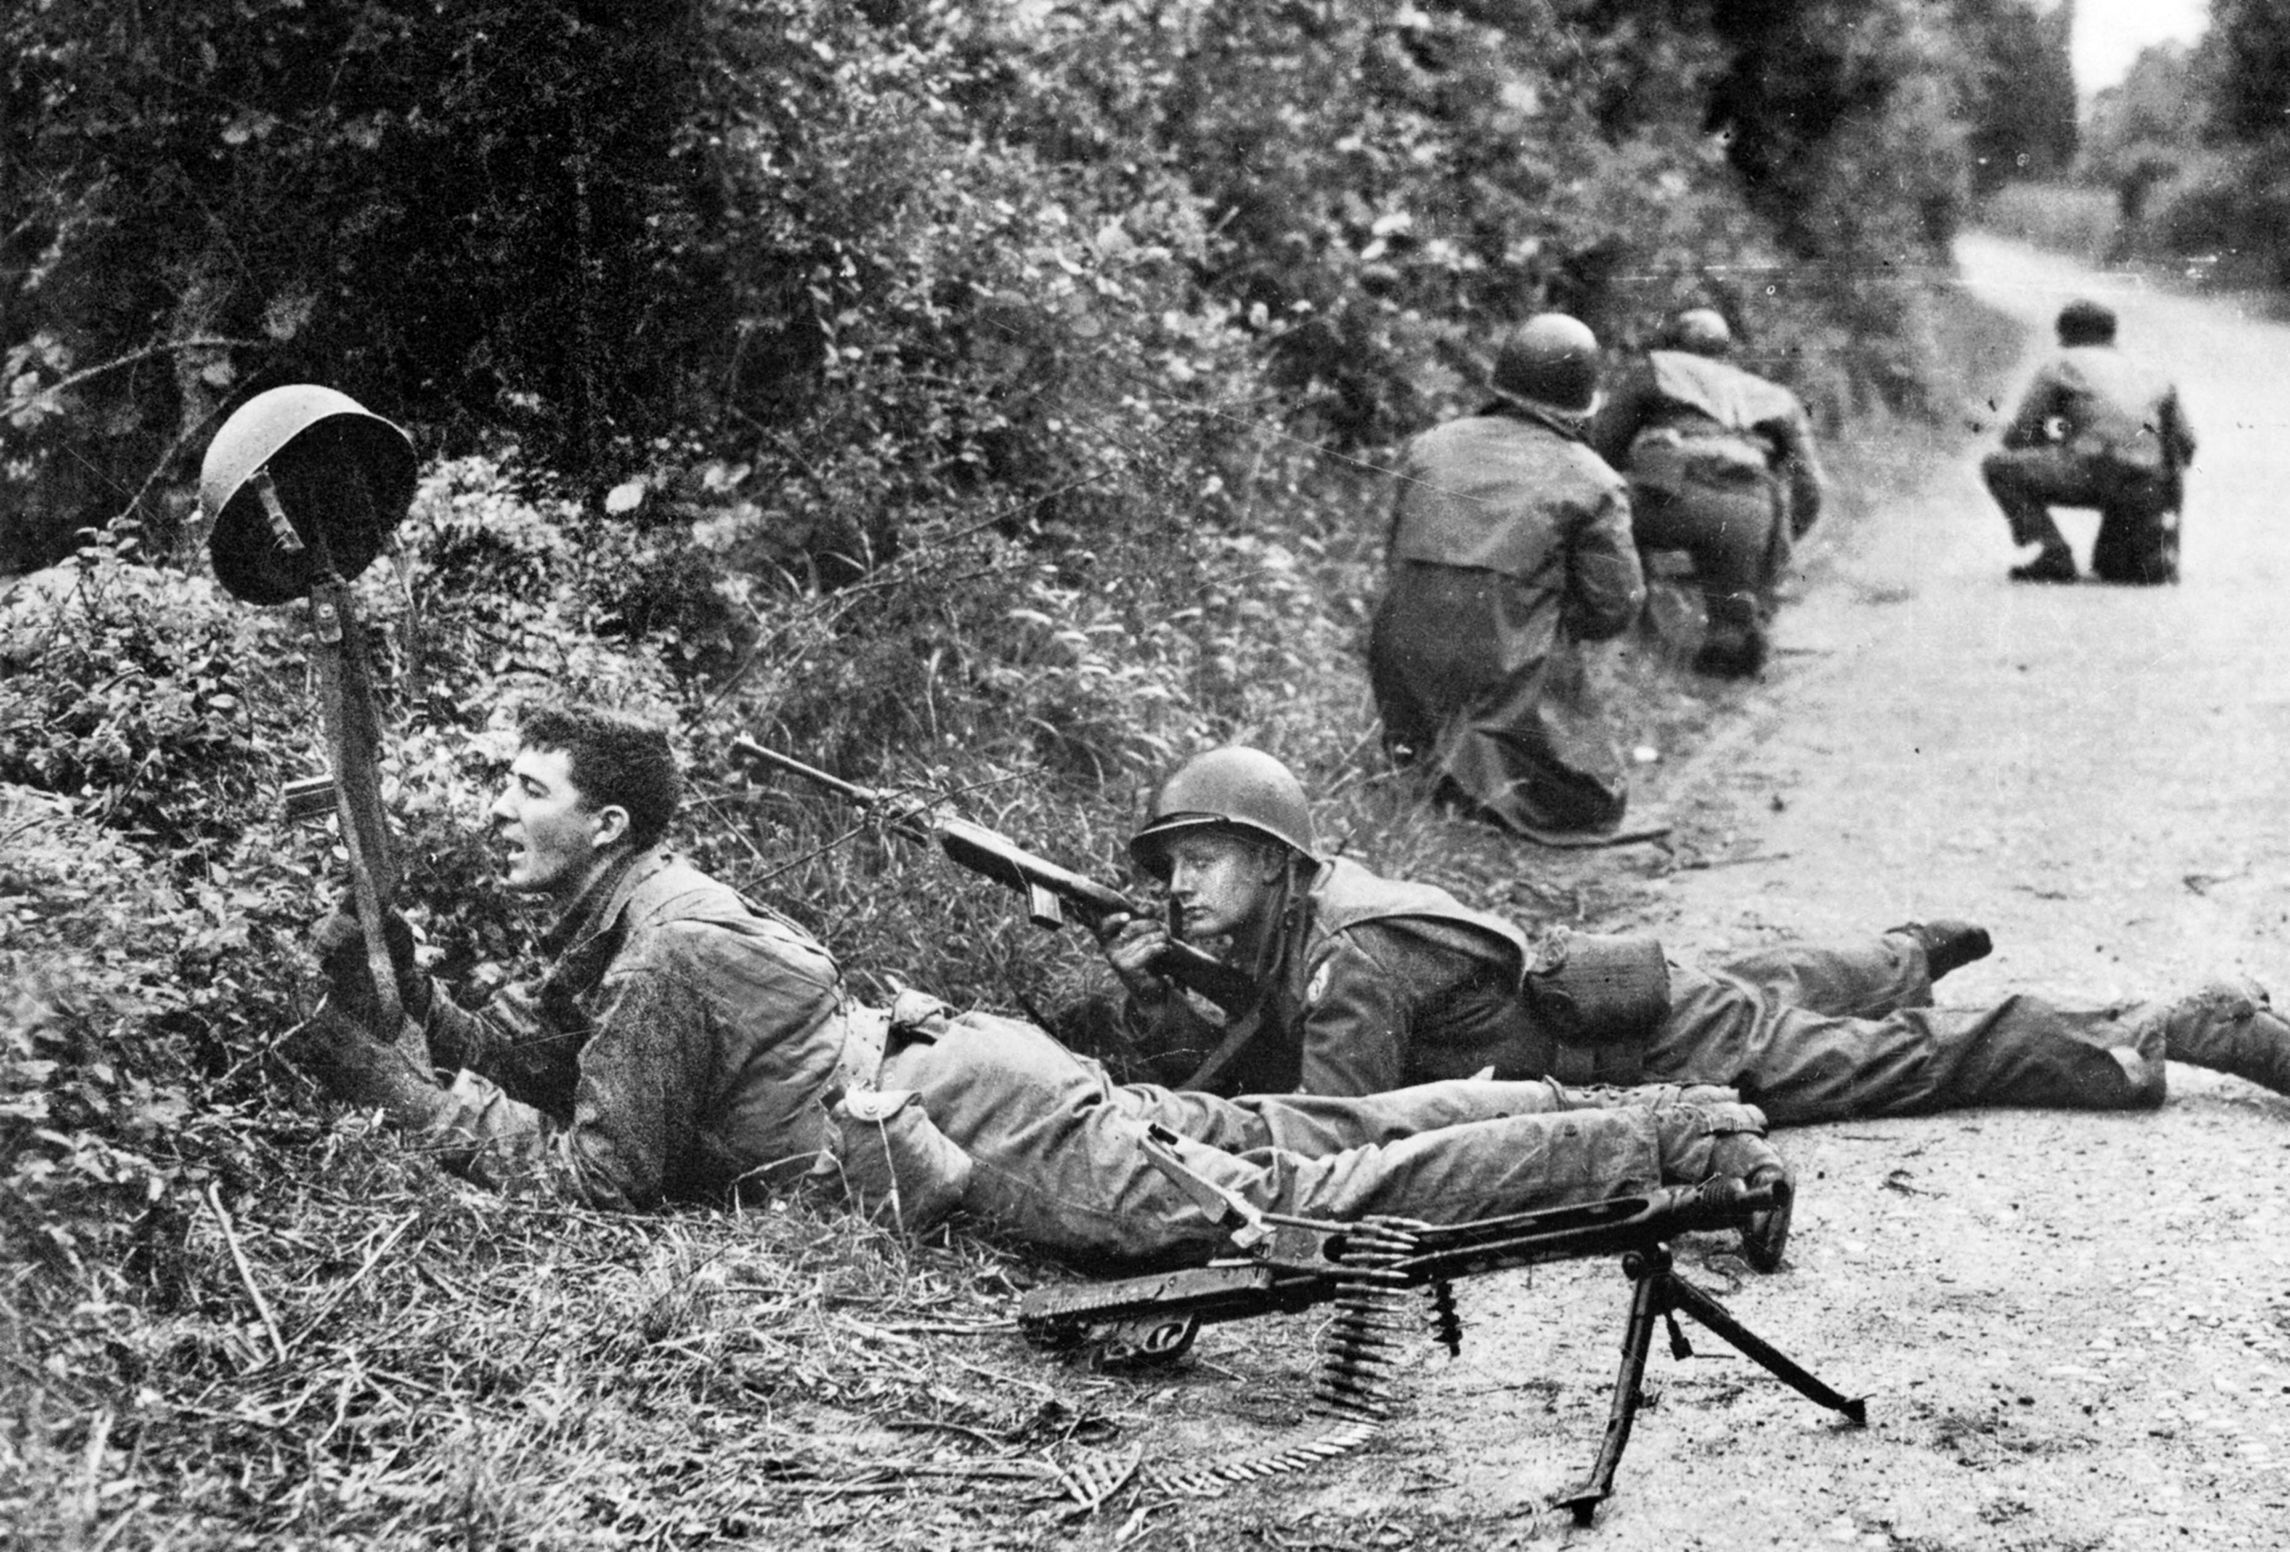 101st Airborne troopers guard a position along a farm lane in hedgerow country while a soldier holds his helmet up in the old trick of trying to draw fire so his buddy with a carbine can locate the enemy position.